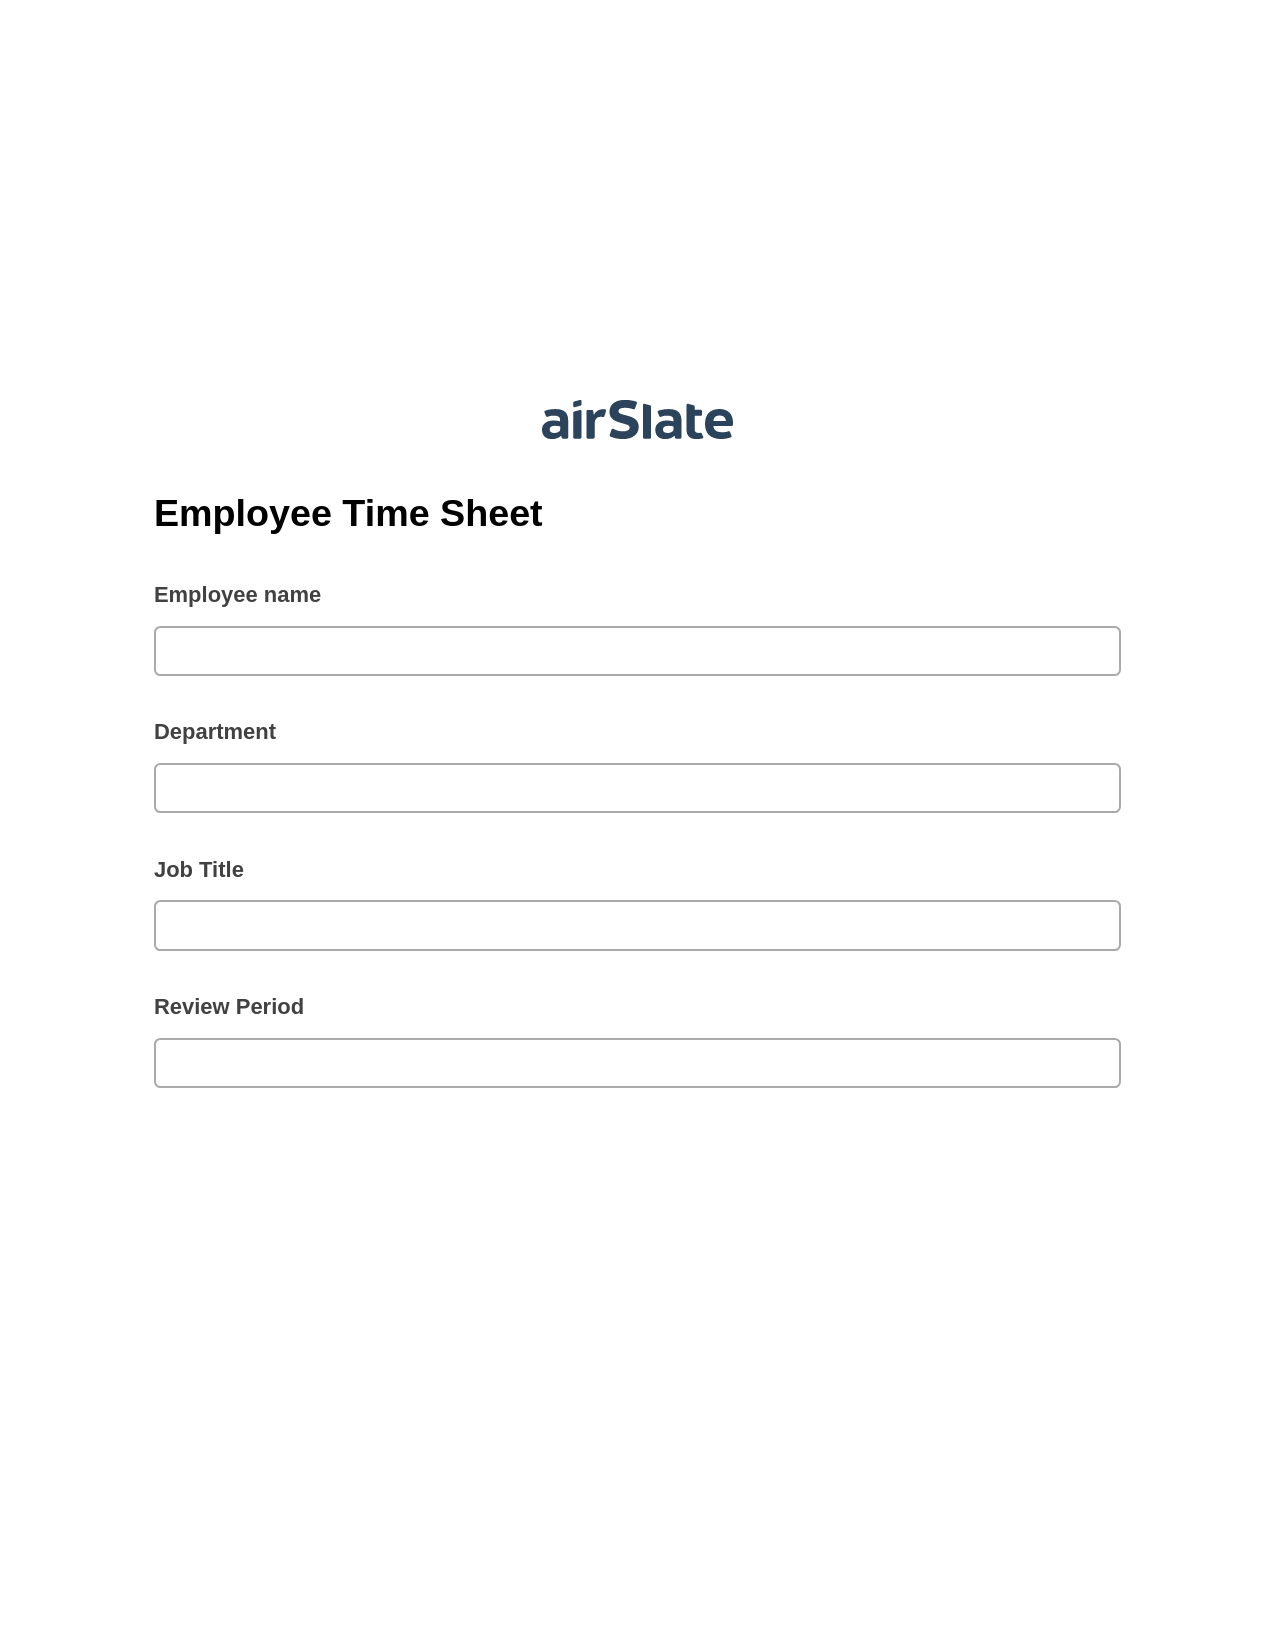 Employee Time Sheet Pre-fill from Excel Spreadsheet Bot, Email Notification Bot, Export to Google Sheet Bot